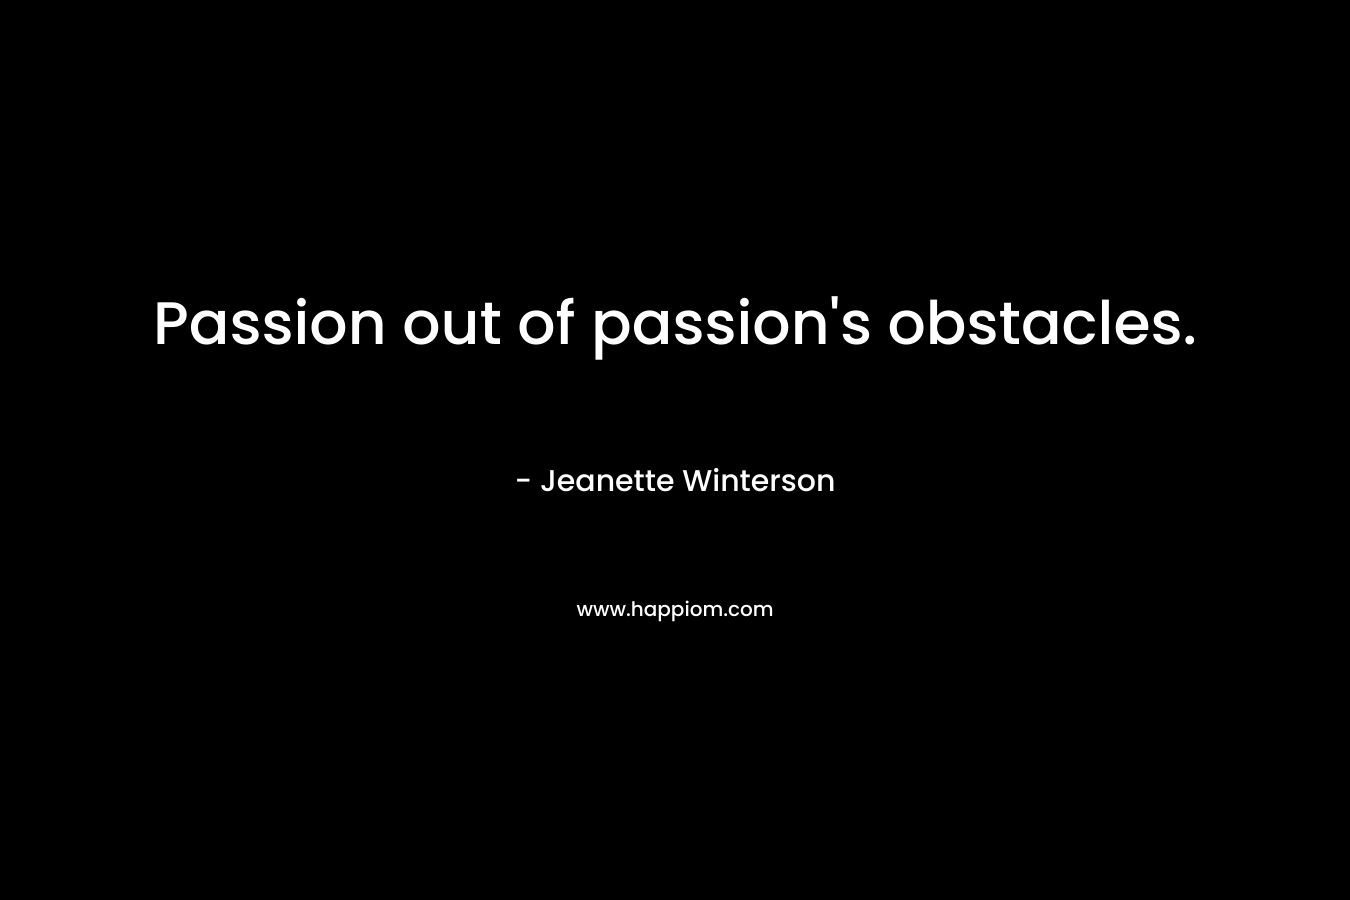 Passion out of passion's obstacles.